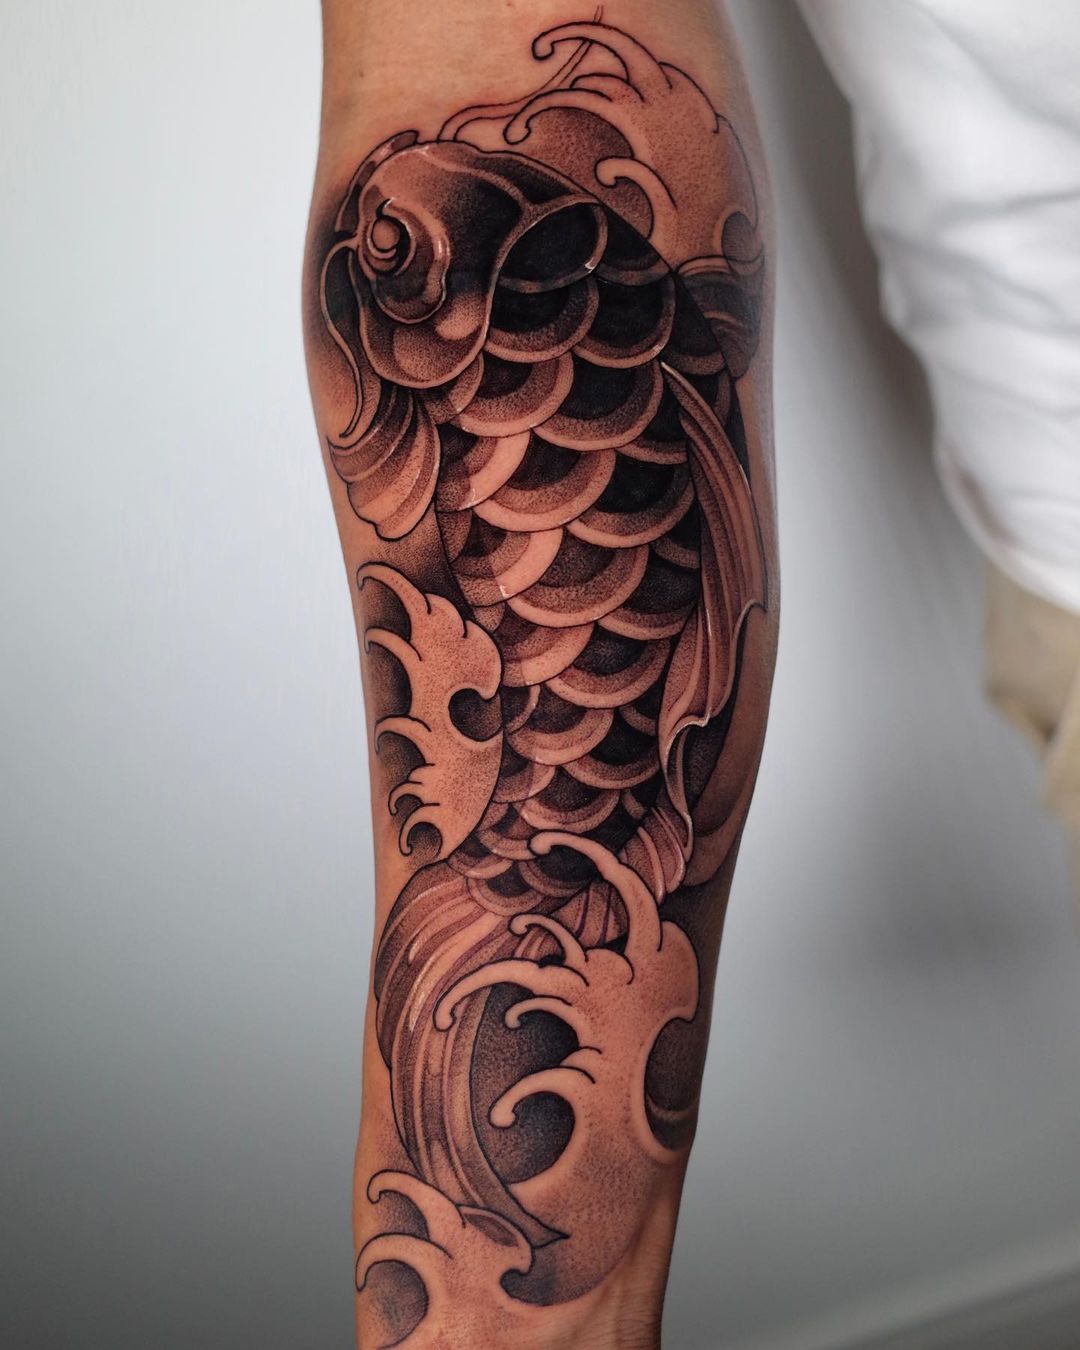 48 Unique Japanese Tattoo Ideas: Meanings and Symbolism - Hairstylery